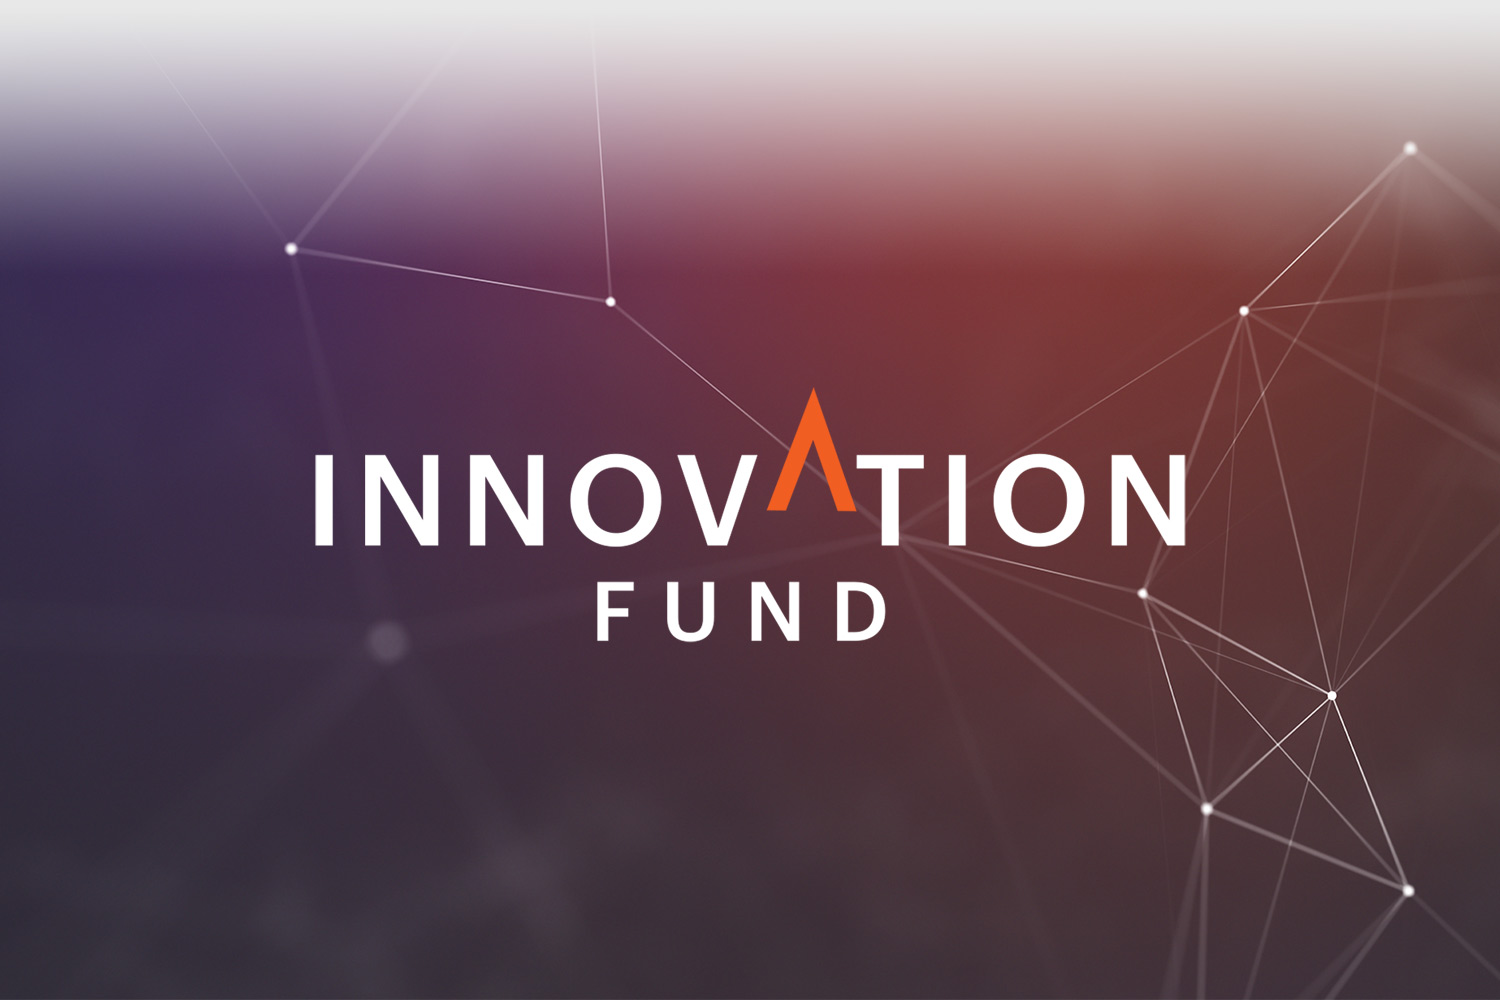 Abstract futuristic graphic with Innovation Fund Logo